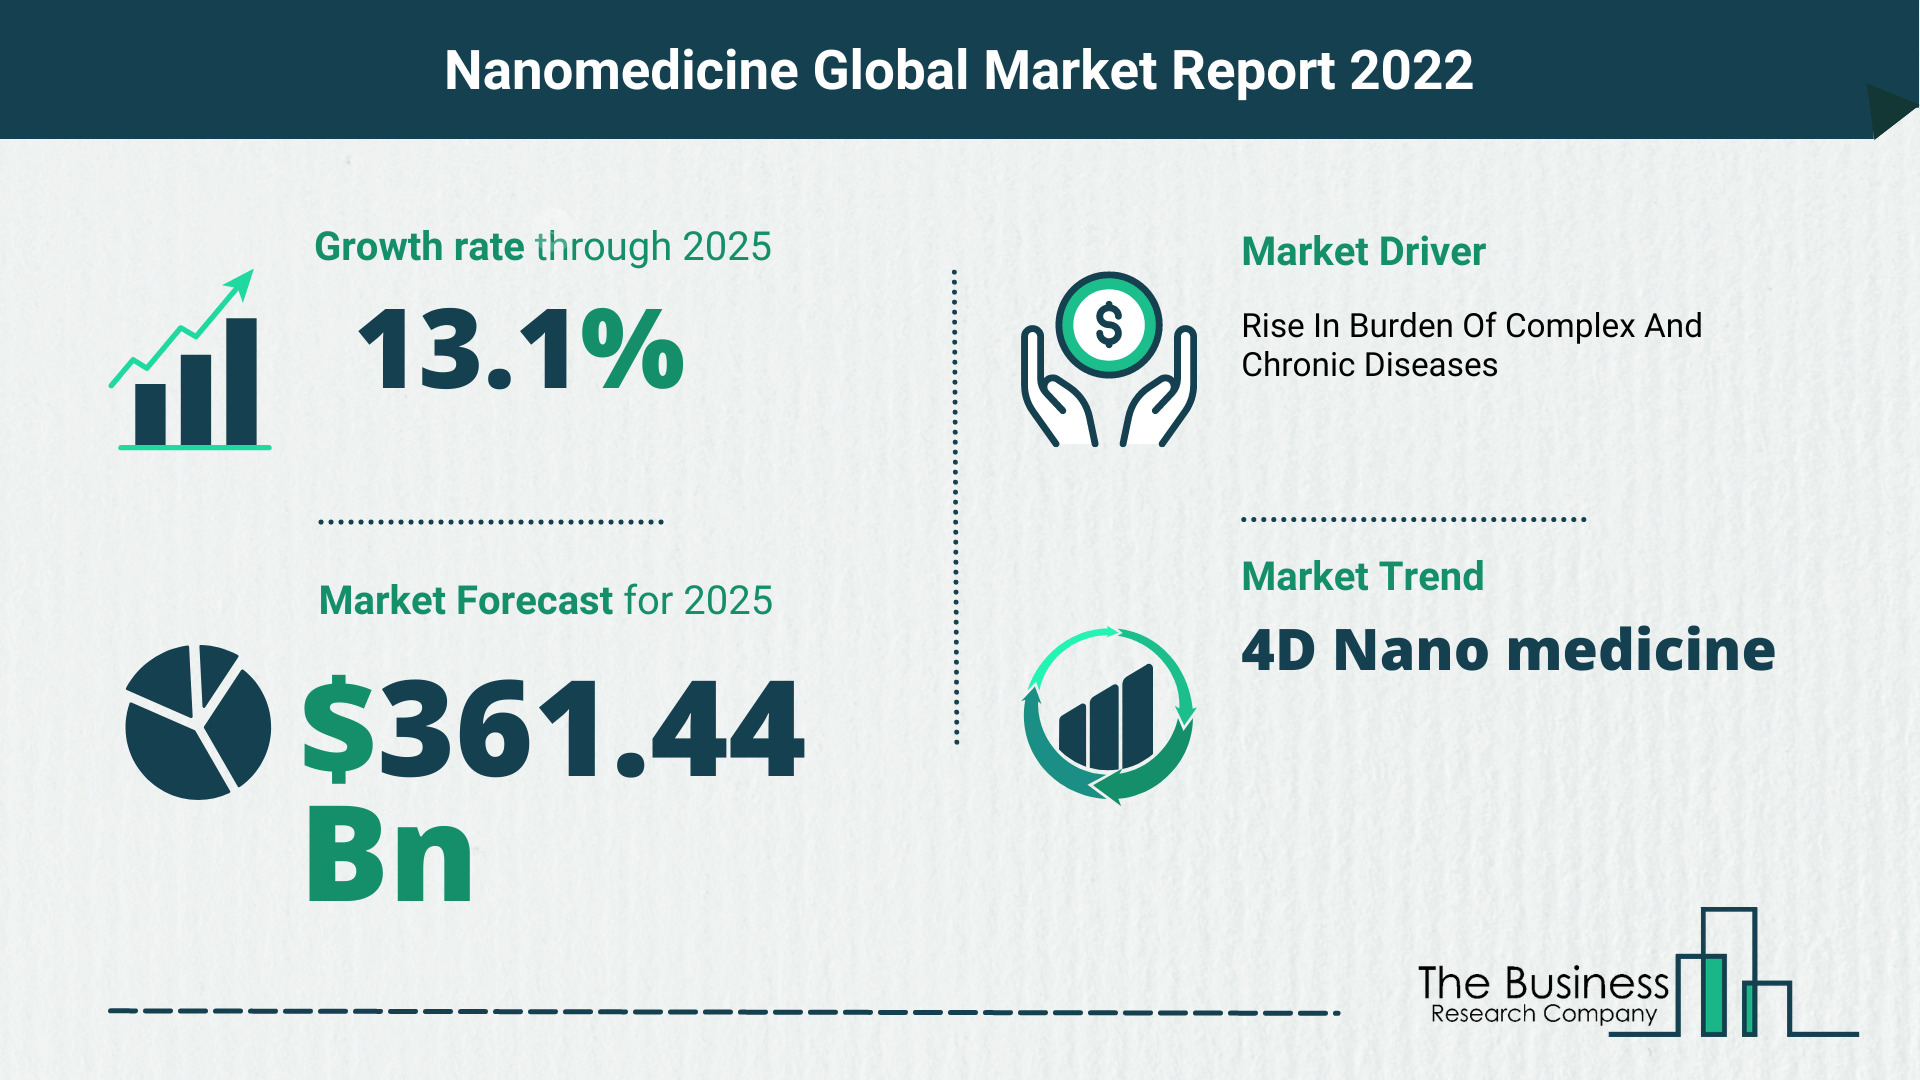 How Will The Nanomedicine Market Grow In 2022?